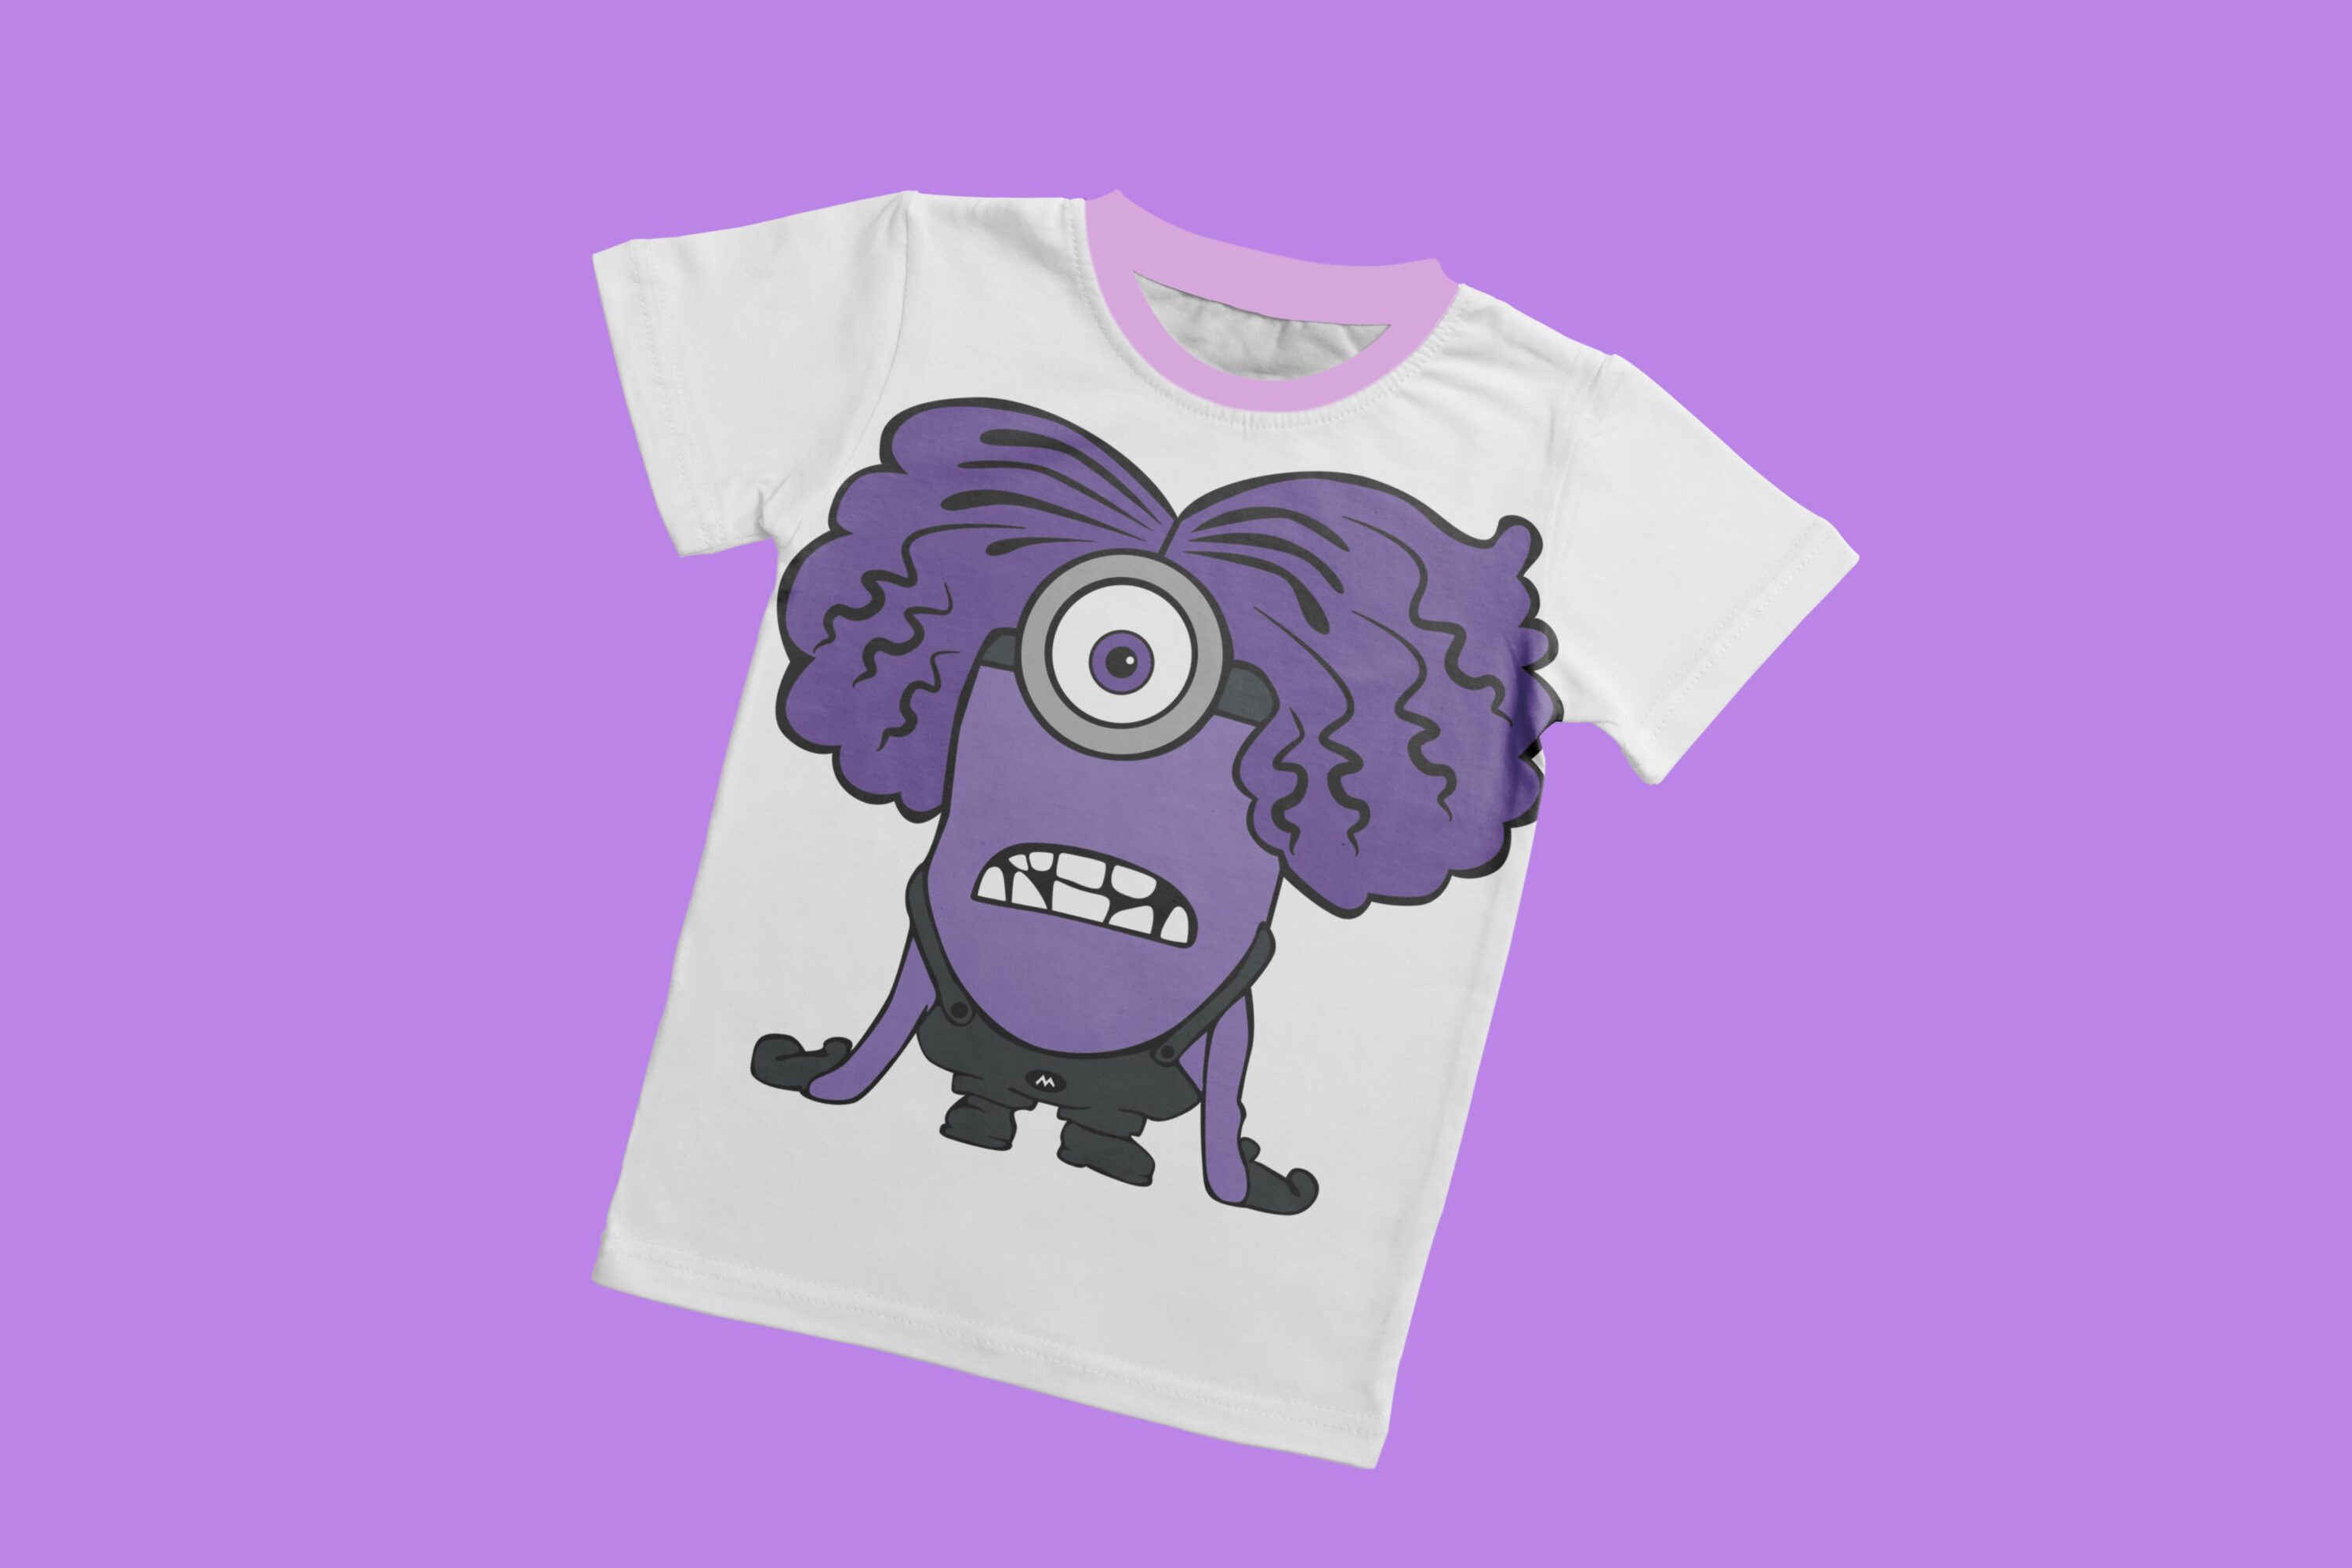 A white T-shirt with a lavender collar and a surprised evil minion.